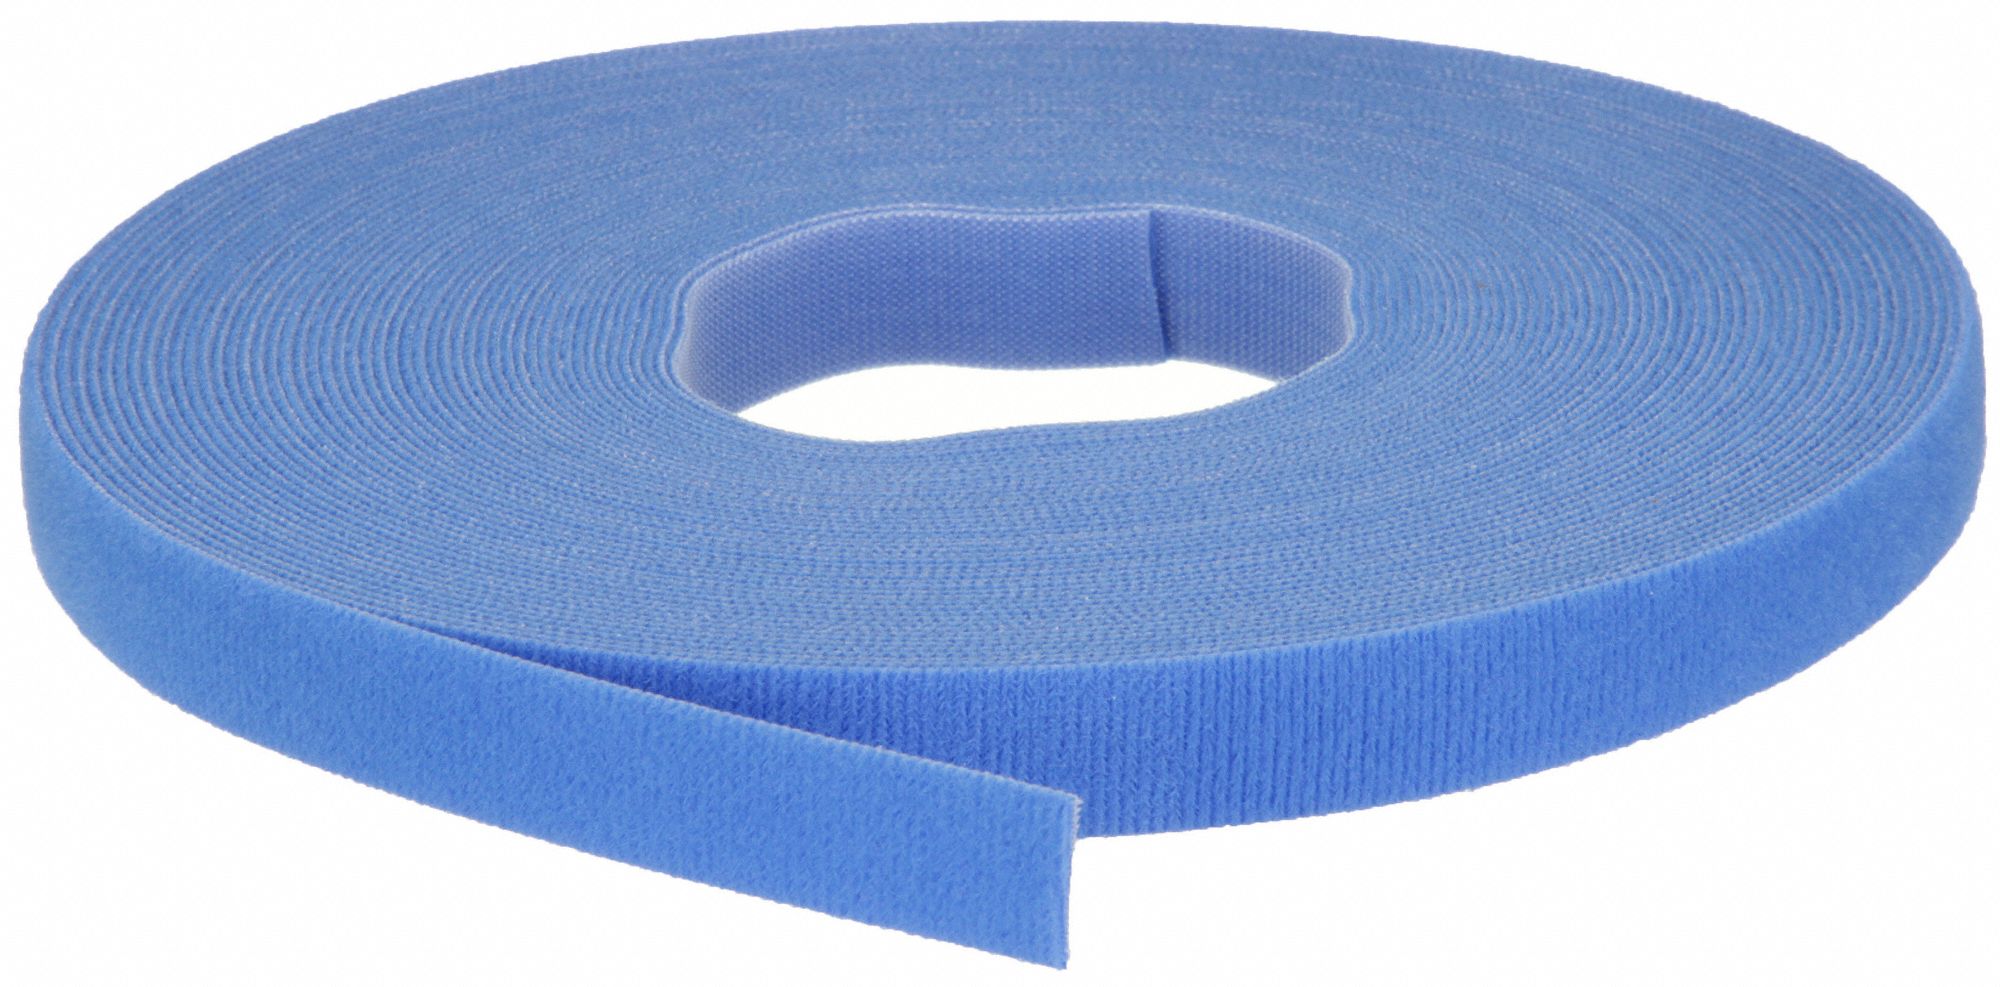 VELCRO BRAND, 75 ft Lg, 0.75 in Wd, Hook-and-Loop Cable Tie Roll -  5JLE6